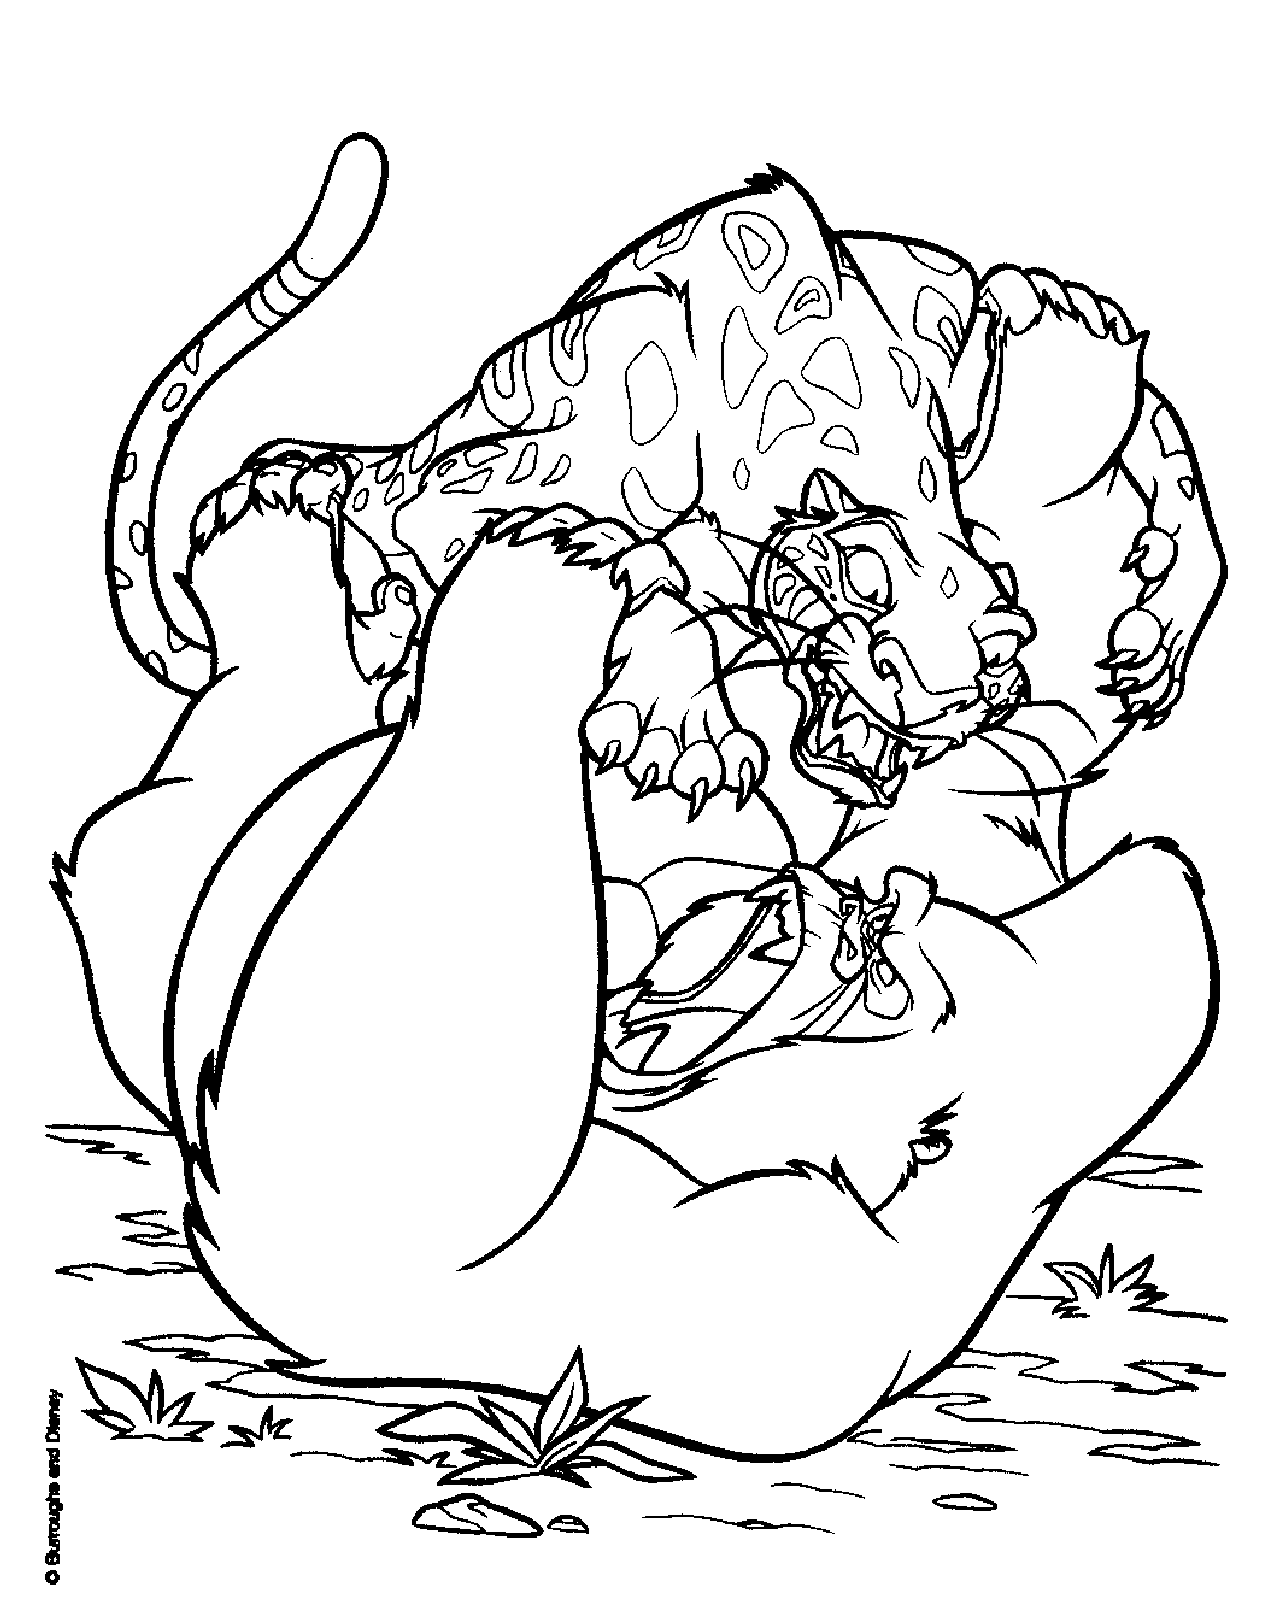 Coloring page: Tarzan (Animation Movies) #131190 - Free Printable Coloring Pages